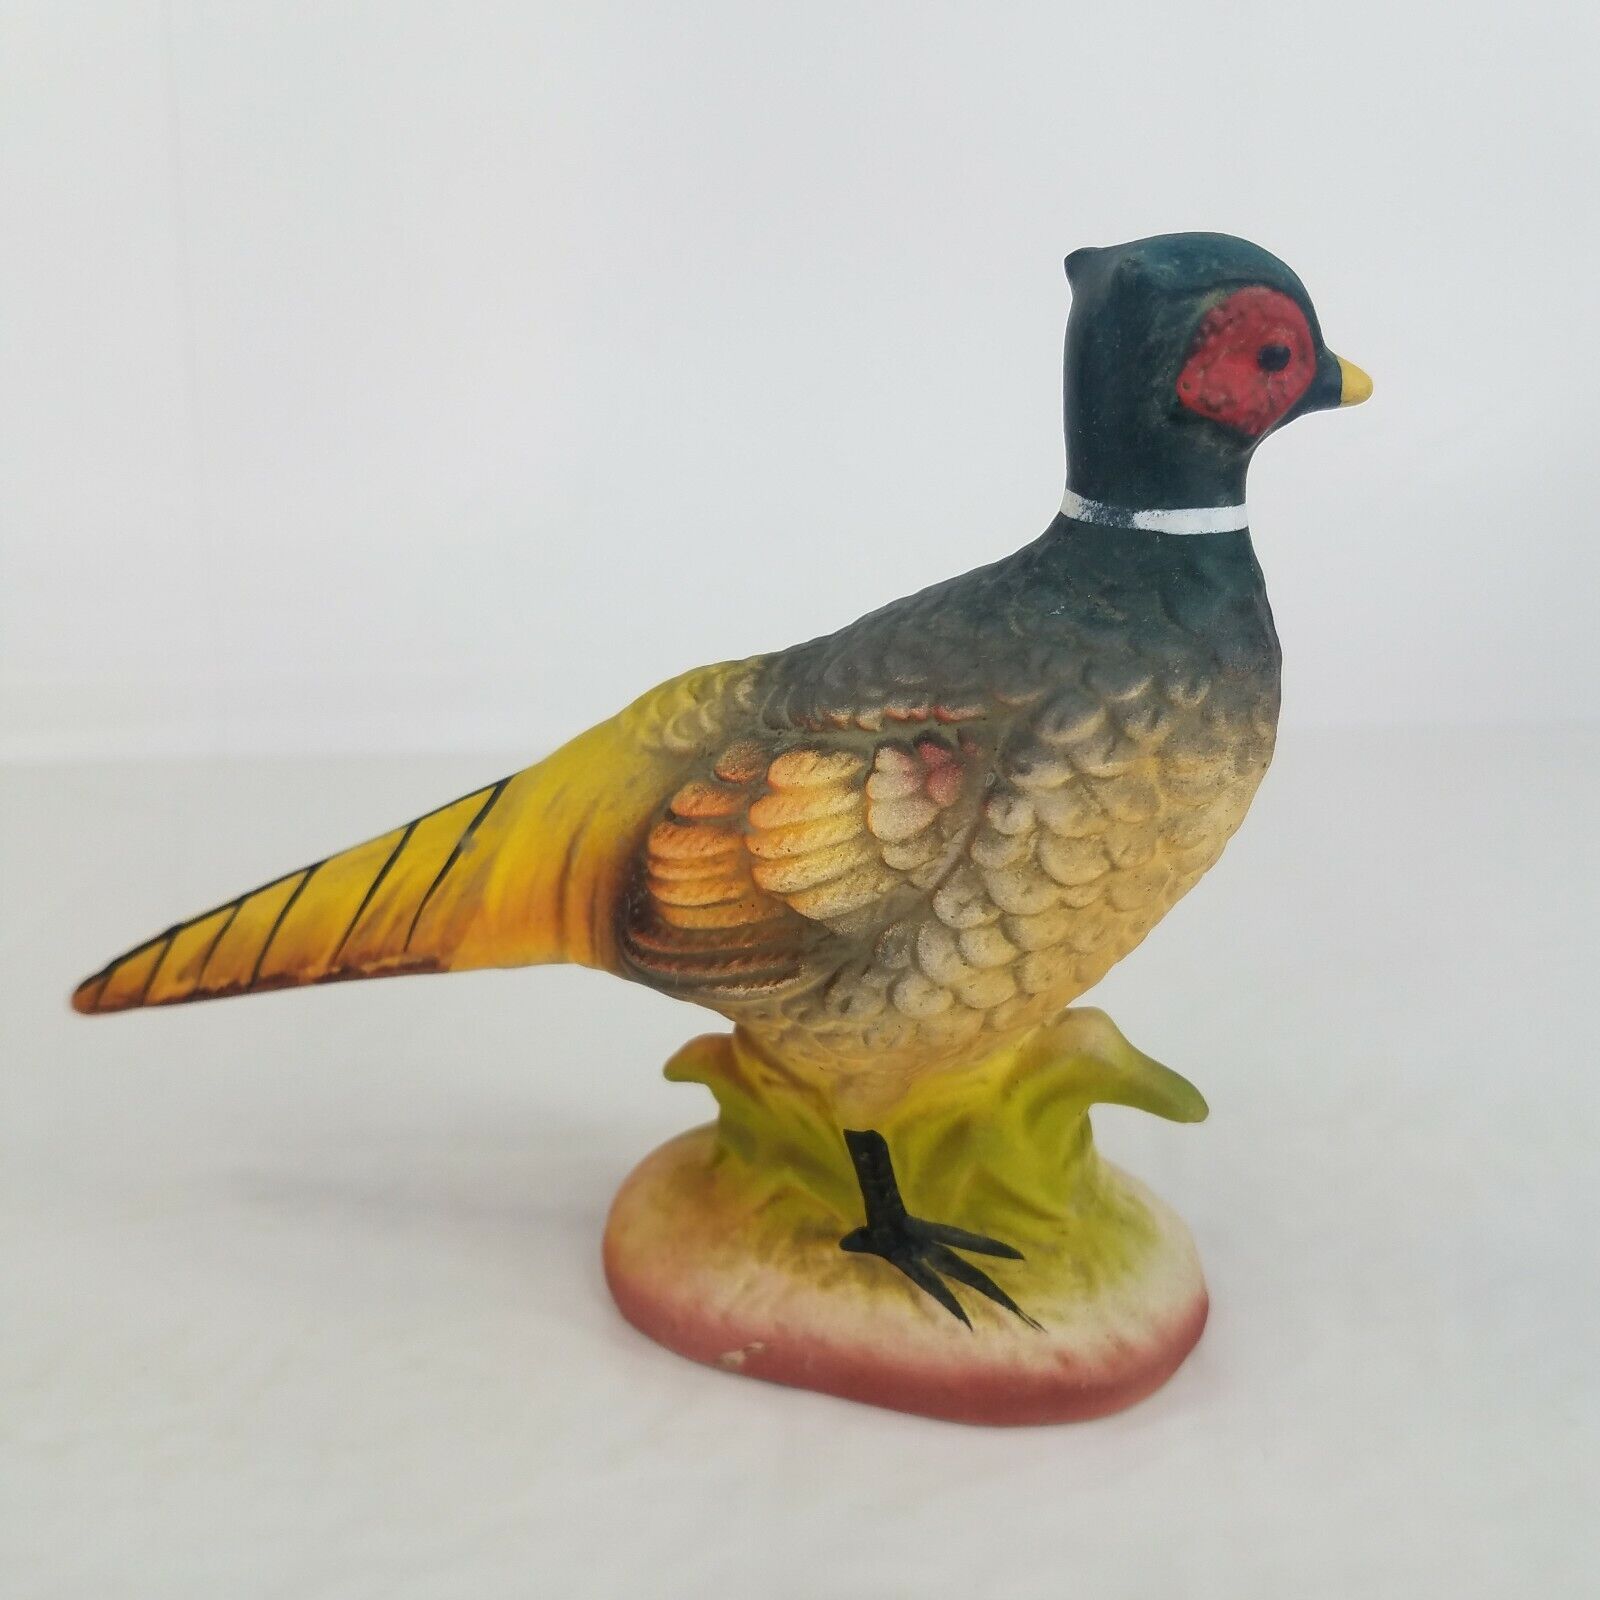 Vintage Napcoware Pheasant Figurine C-6002 National Potteries Co Made in Japan